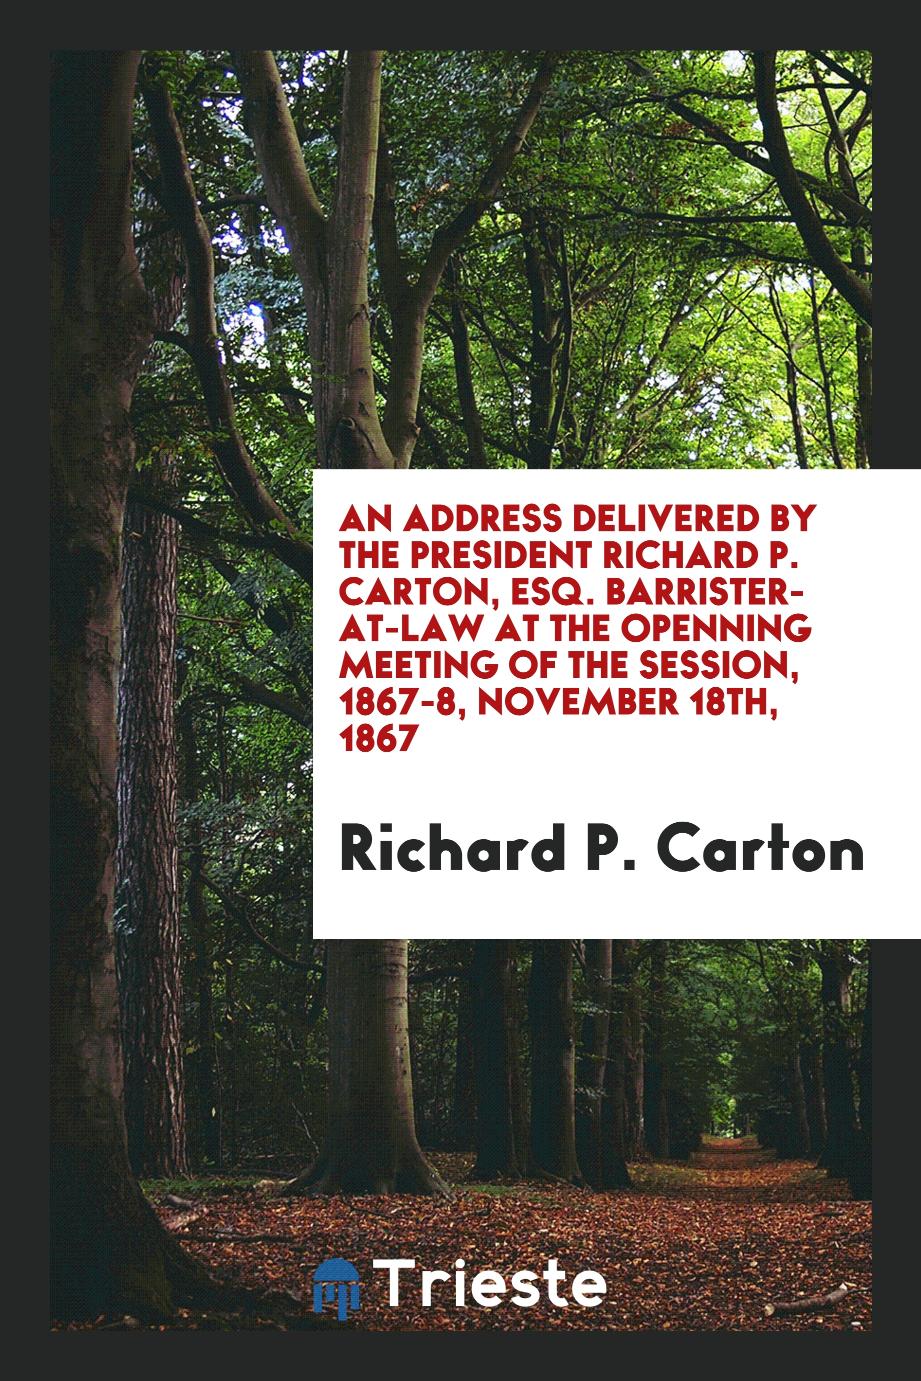 An address delivered by the President Richard P. Carton, esq. barrister-at-law at the openning meeting of the session, 1867-8, November 18th, 1867